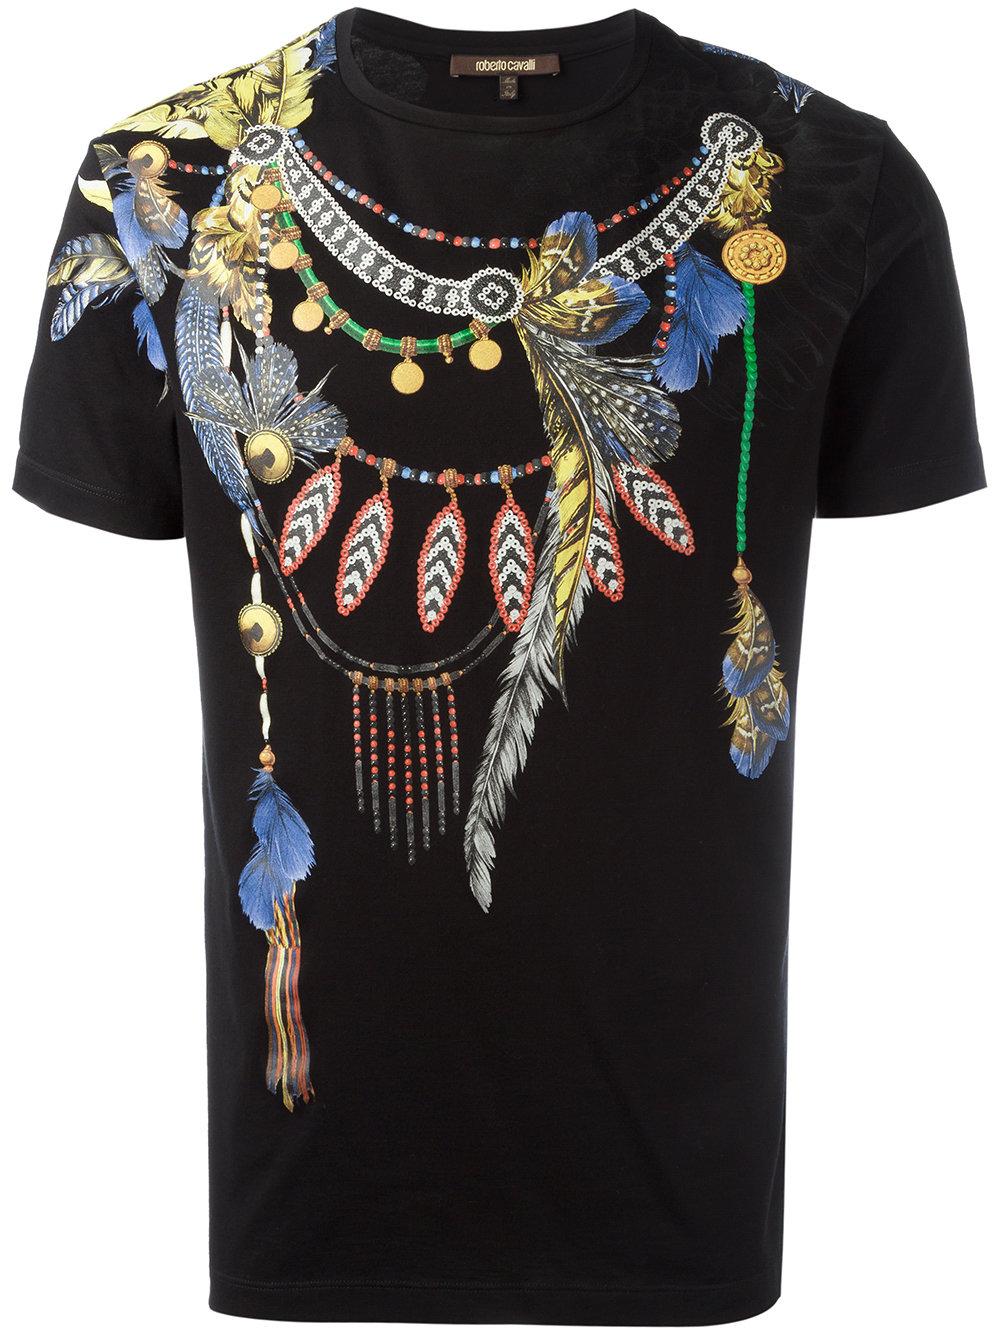 Roberto Cavalli Cotton Wing Printed T-shirt in Black for Men - Lyst